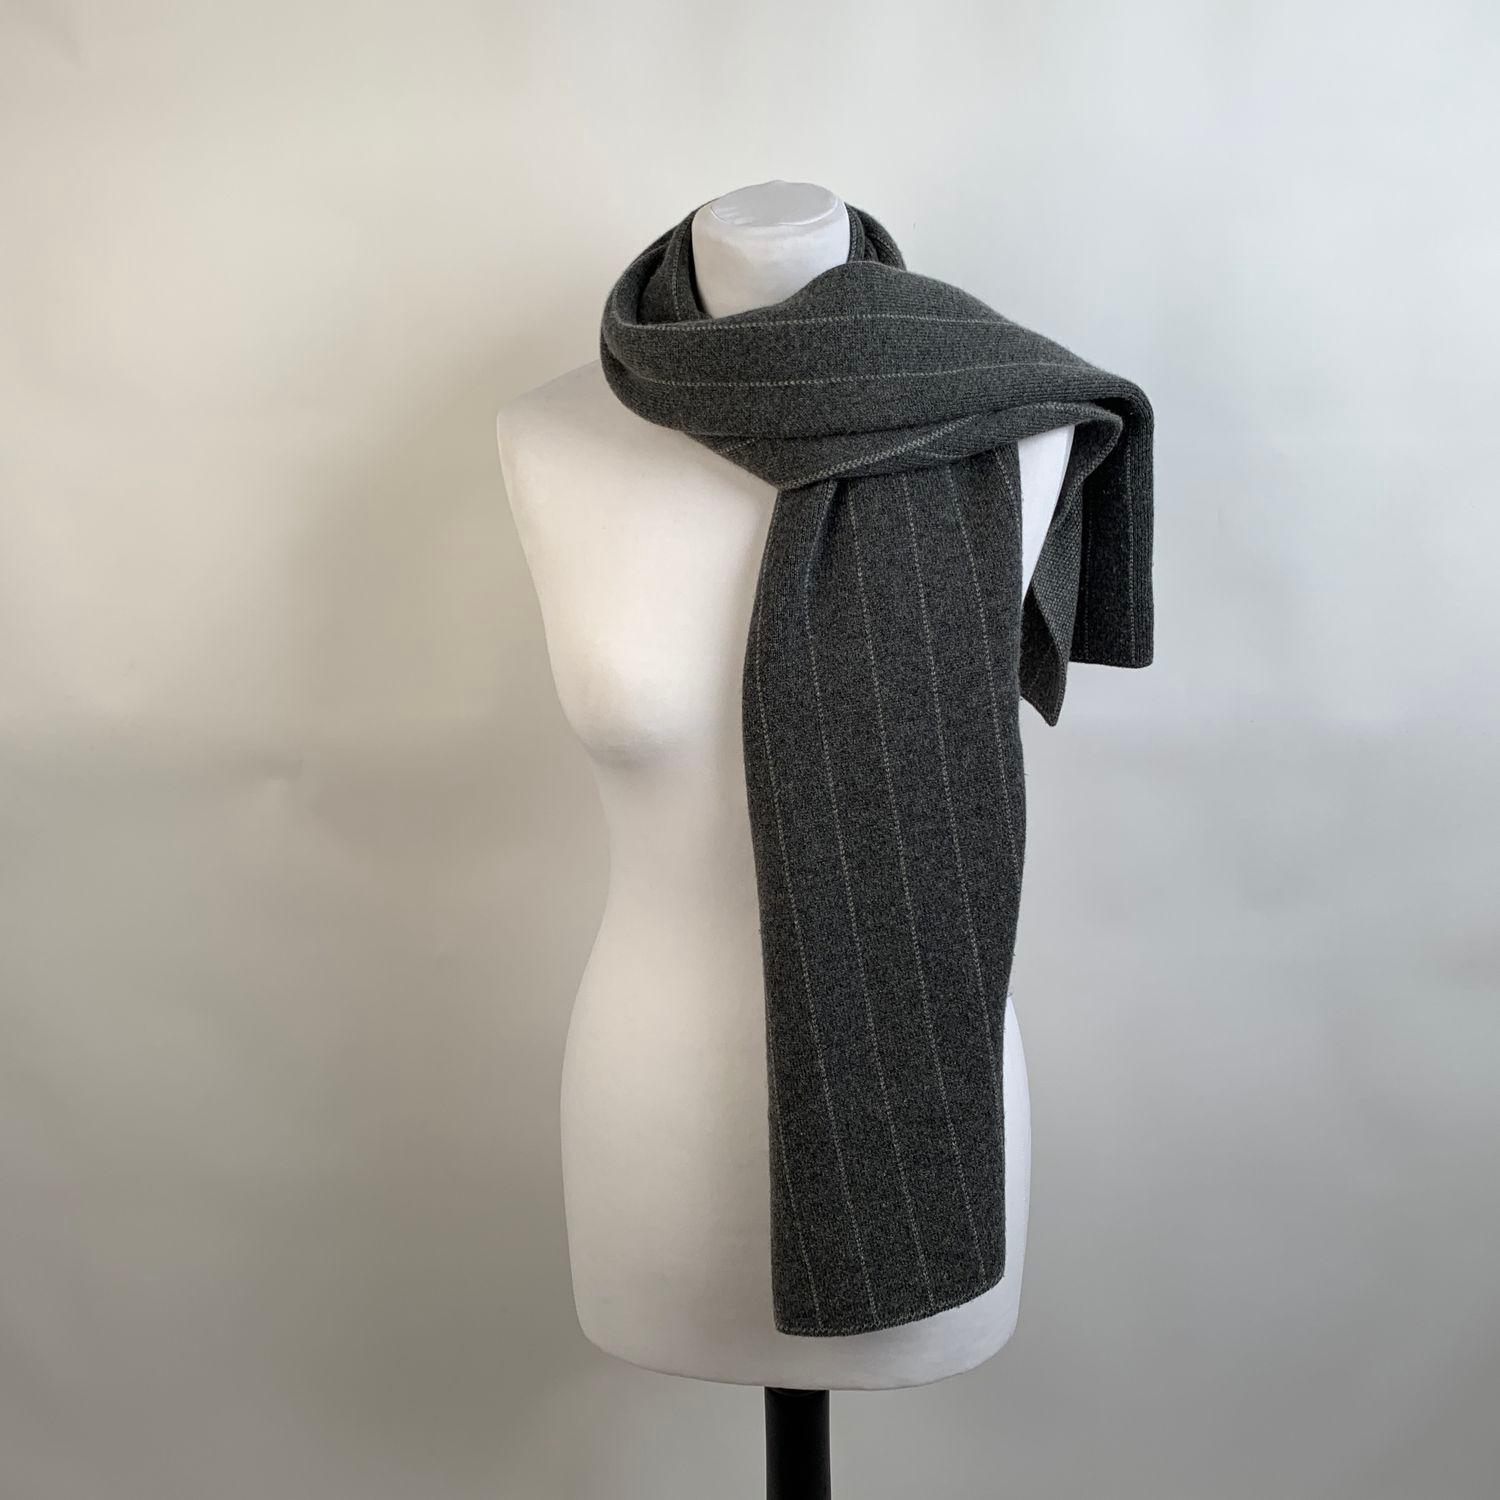 Vintage Loro Piana cashmere scarf. It features 2 sides: 1 in solid gray and 1 with a striped pattern Fringed hem. Composition: 100% cashmere. Made in Italy. Width: 18.5 inches - 47 cm - Lenght: 61.5 inches - 156 cm




Details

MATERIAL: